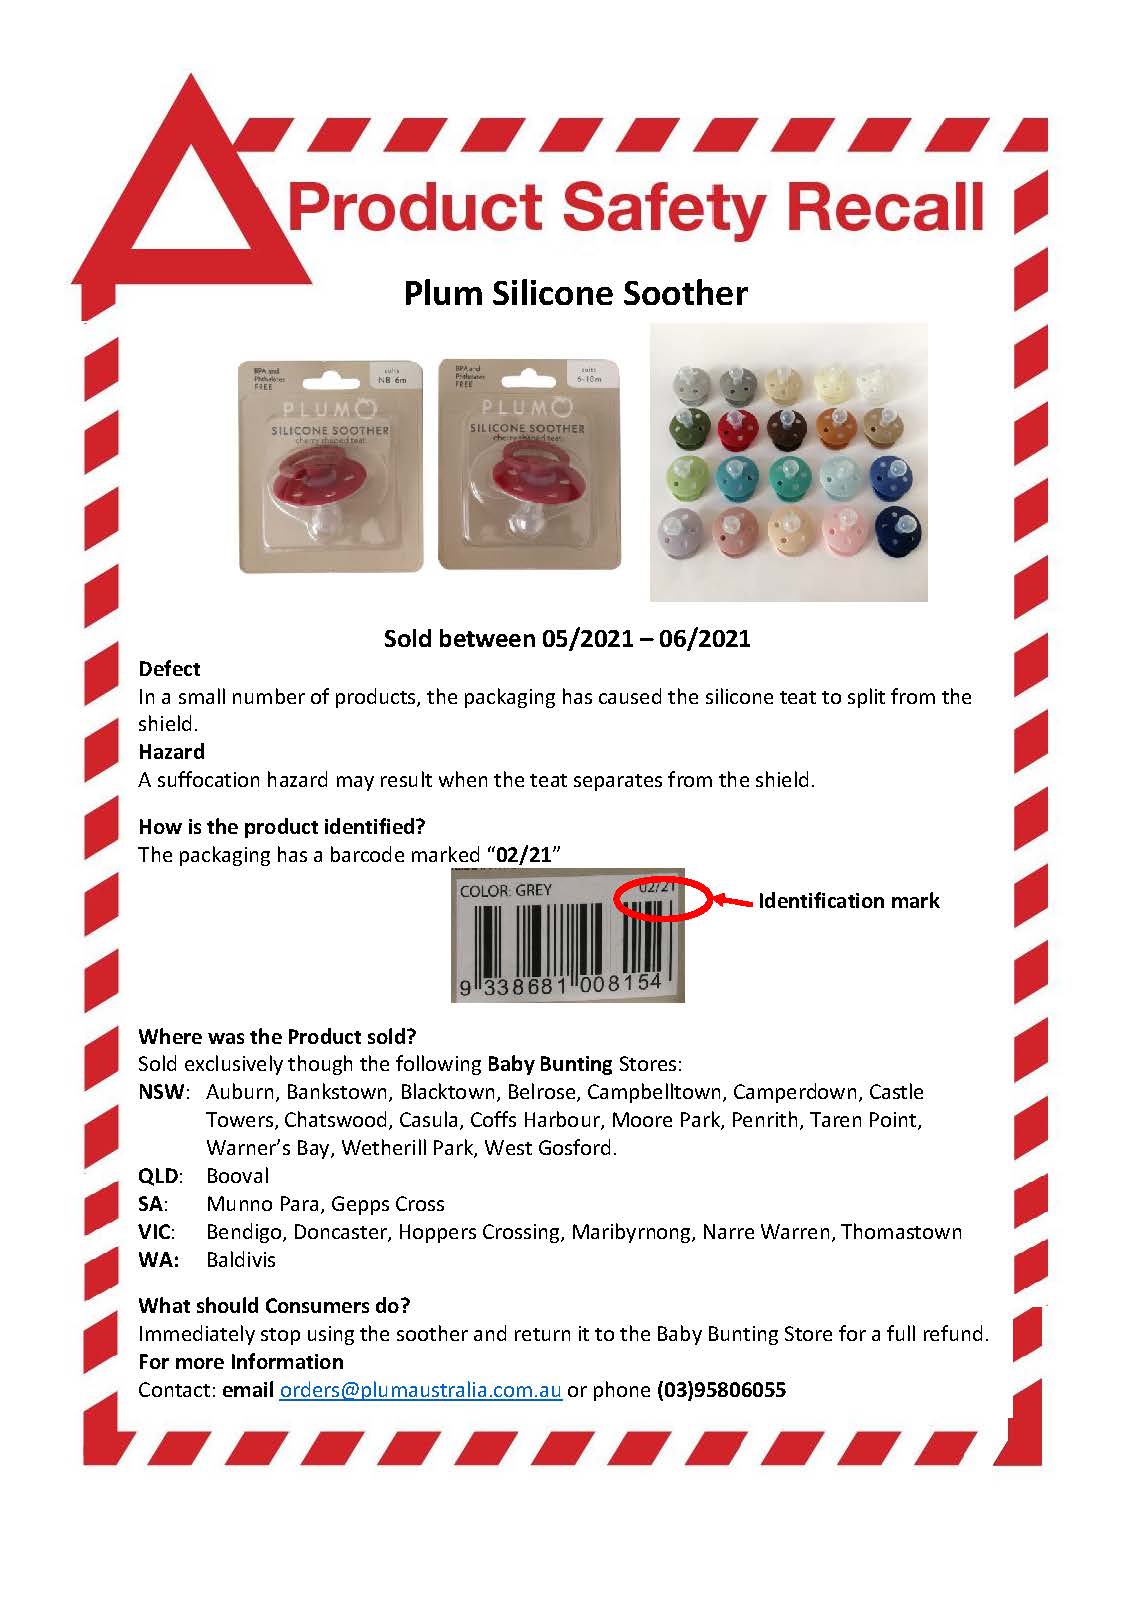 Plum Silicone Soother Recall Notice